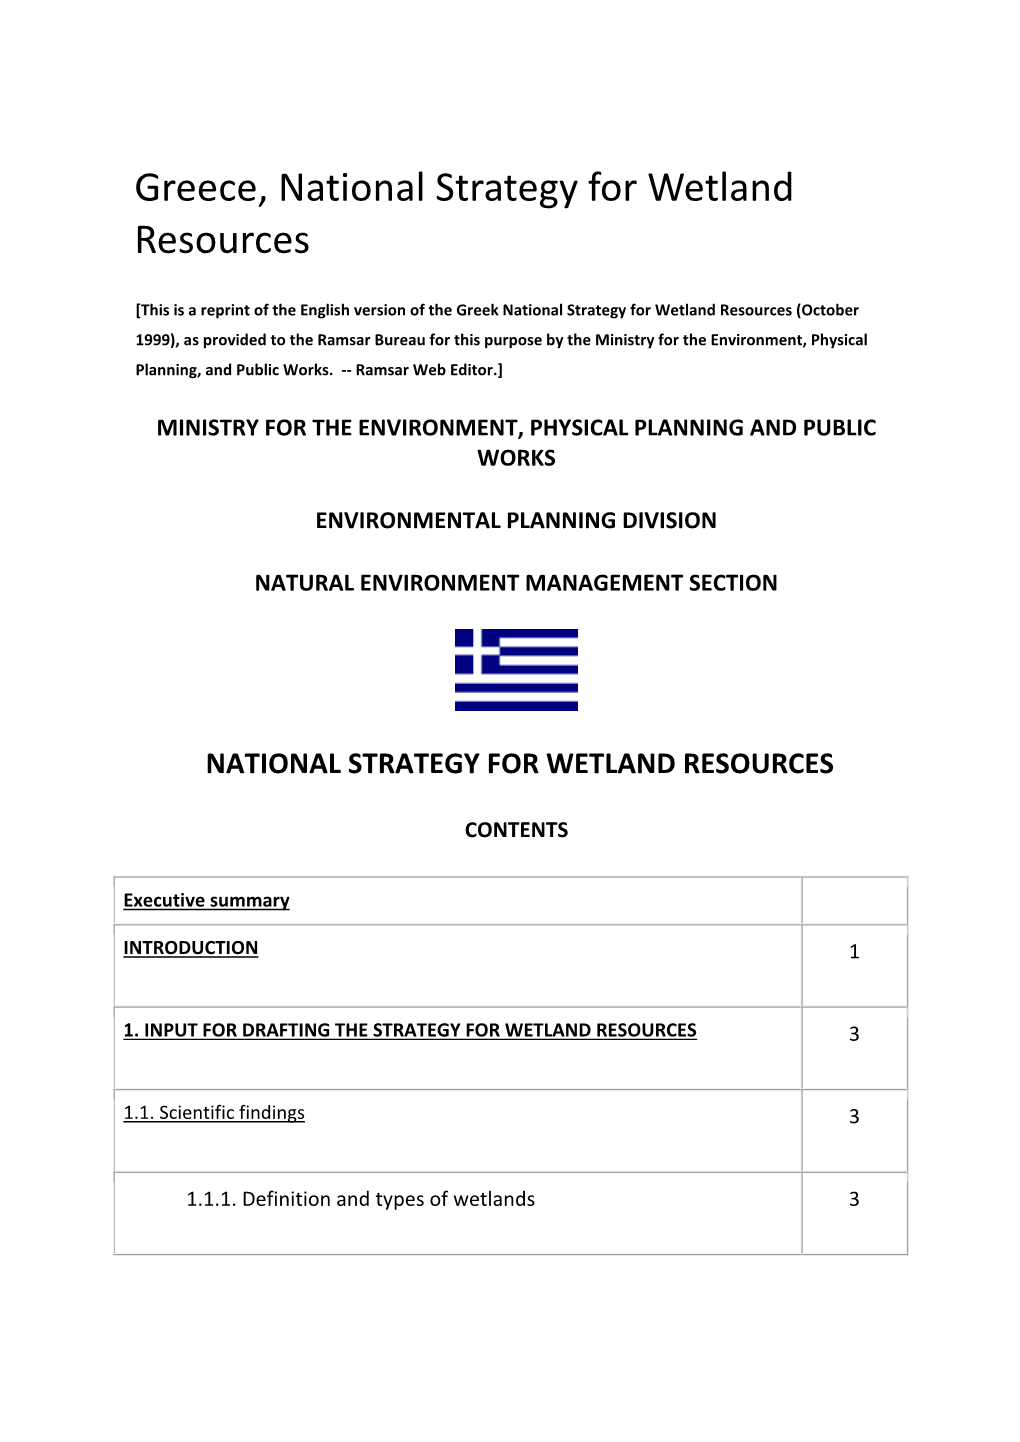 Greece, National Strategy for Wetland Resources